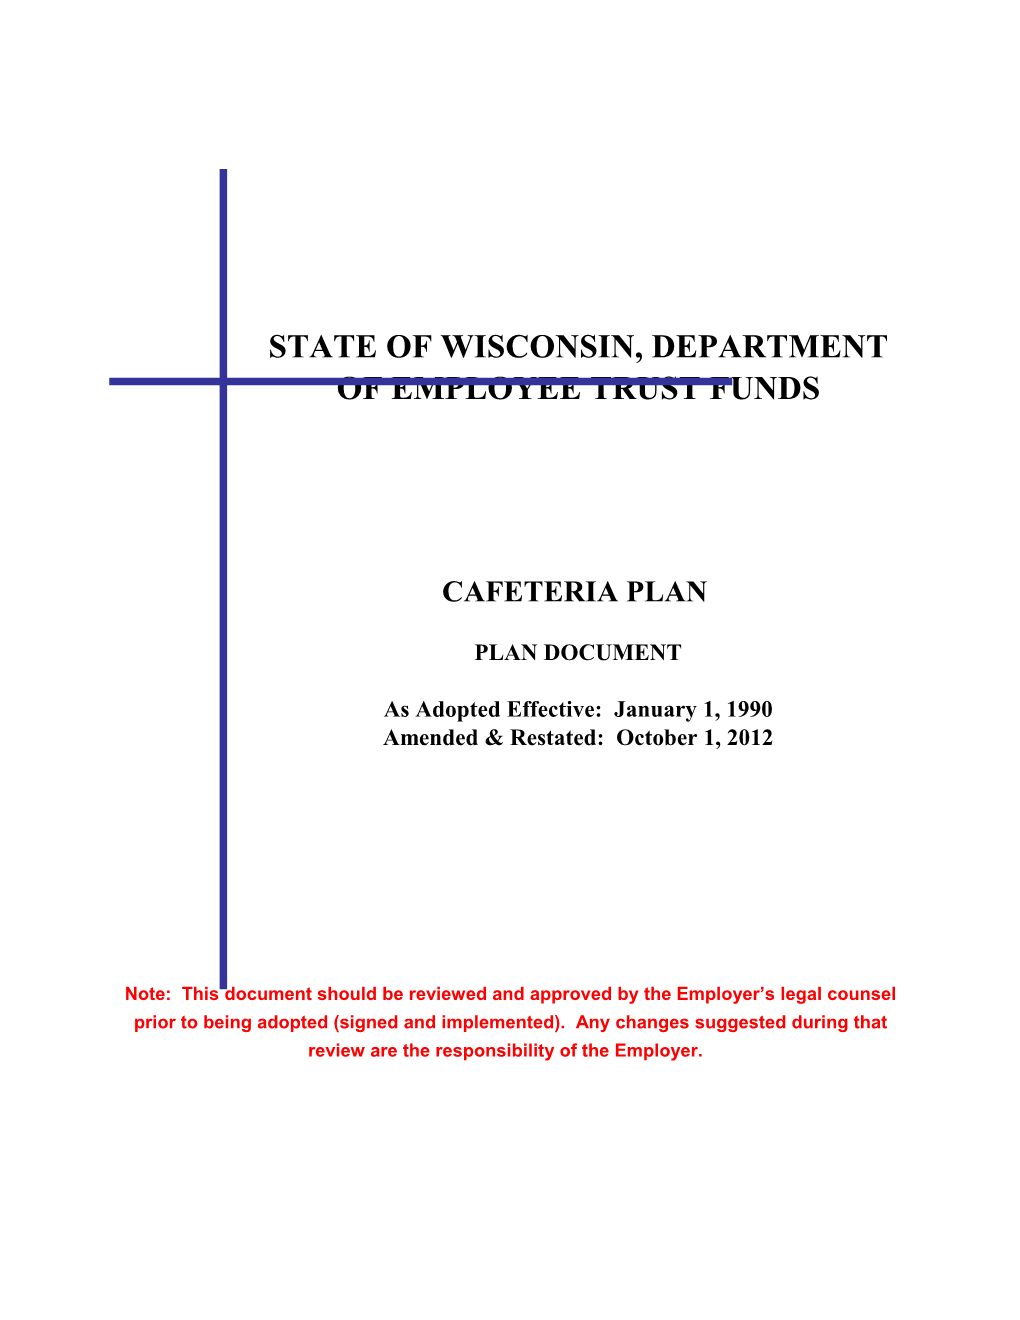 State of Wisconsin, Department of Employee Trust Funds